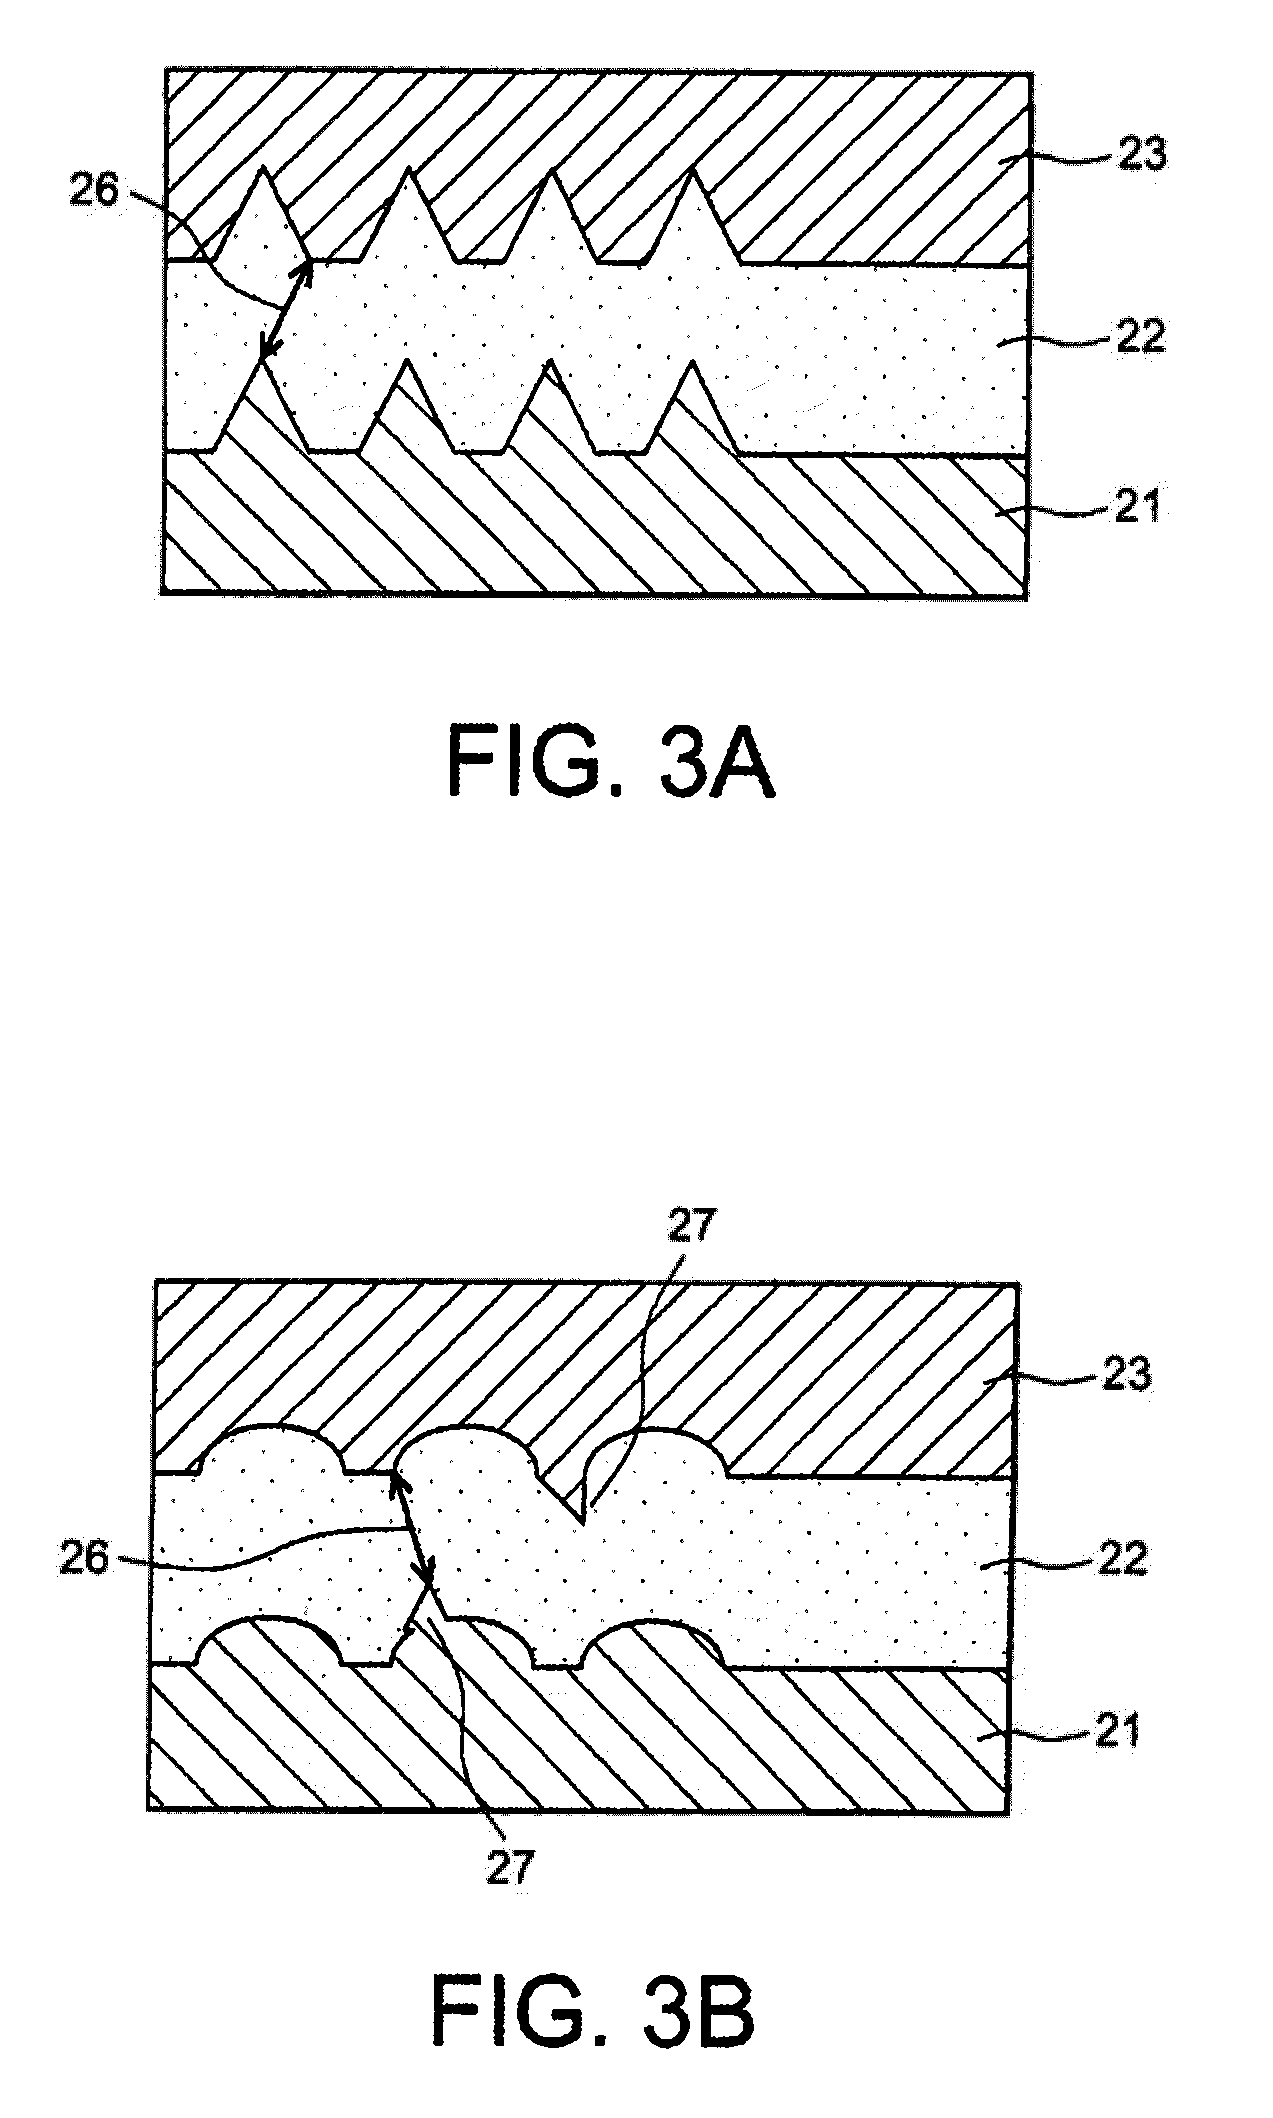 Method for fabricating a nanostructured substrate for OLED and method for fabricating an OLED